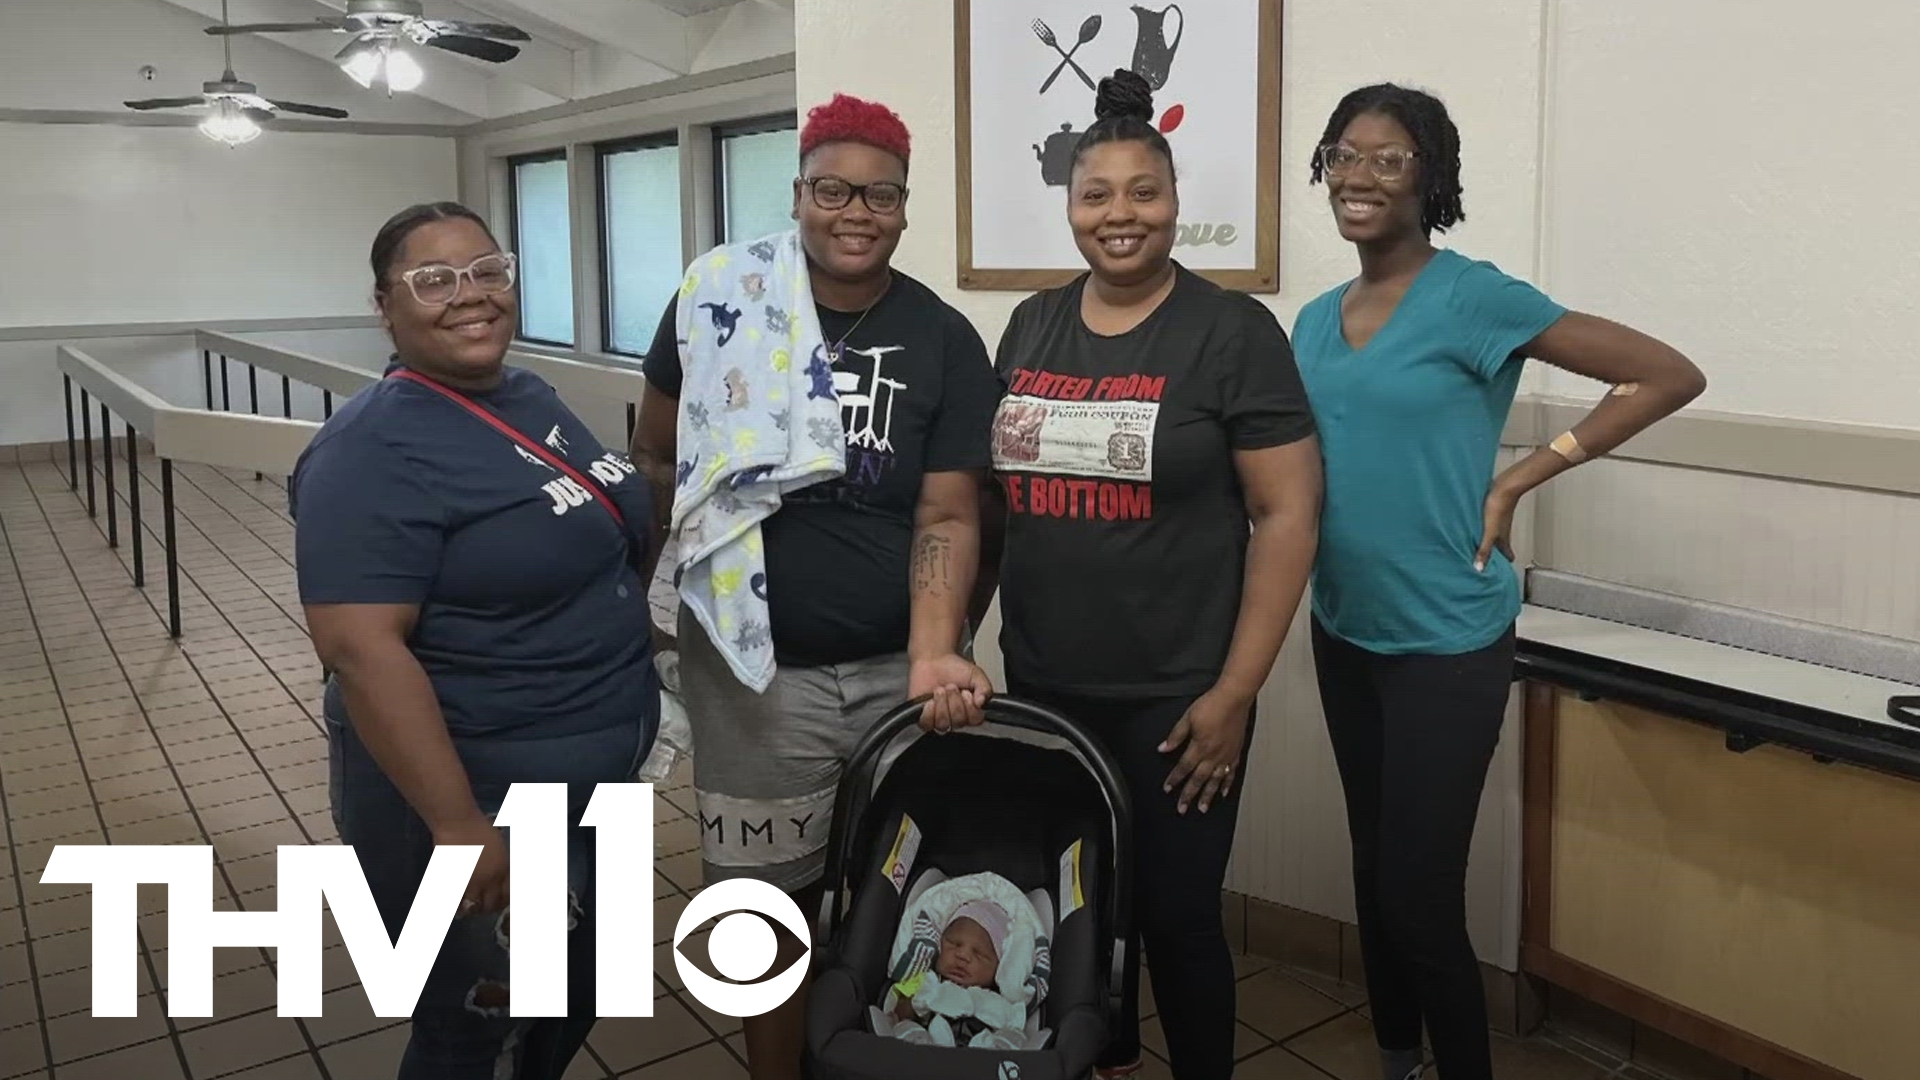 Ask any mother, and they'll tell you giving birth is an unforgettable moment— especially when the miracle of life happens at a Golden Corral in North Little Rock.